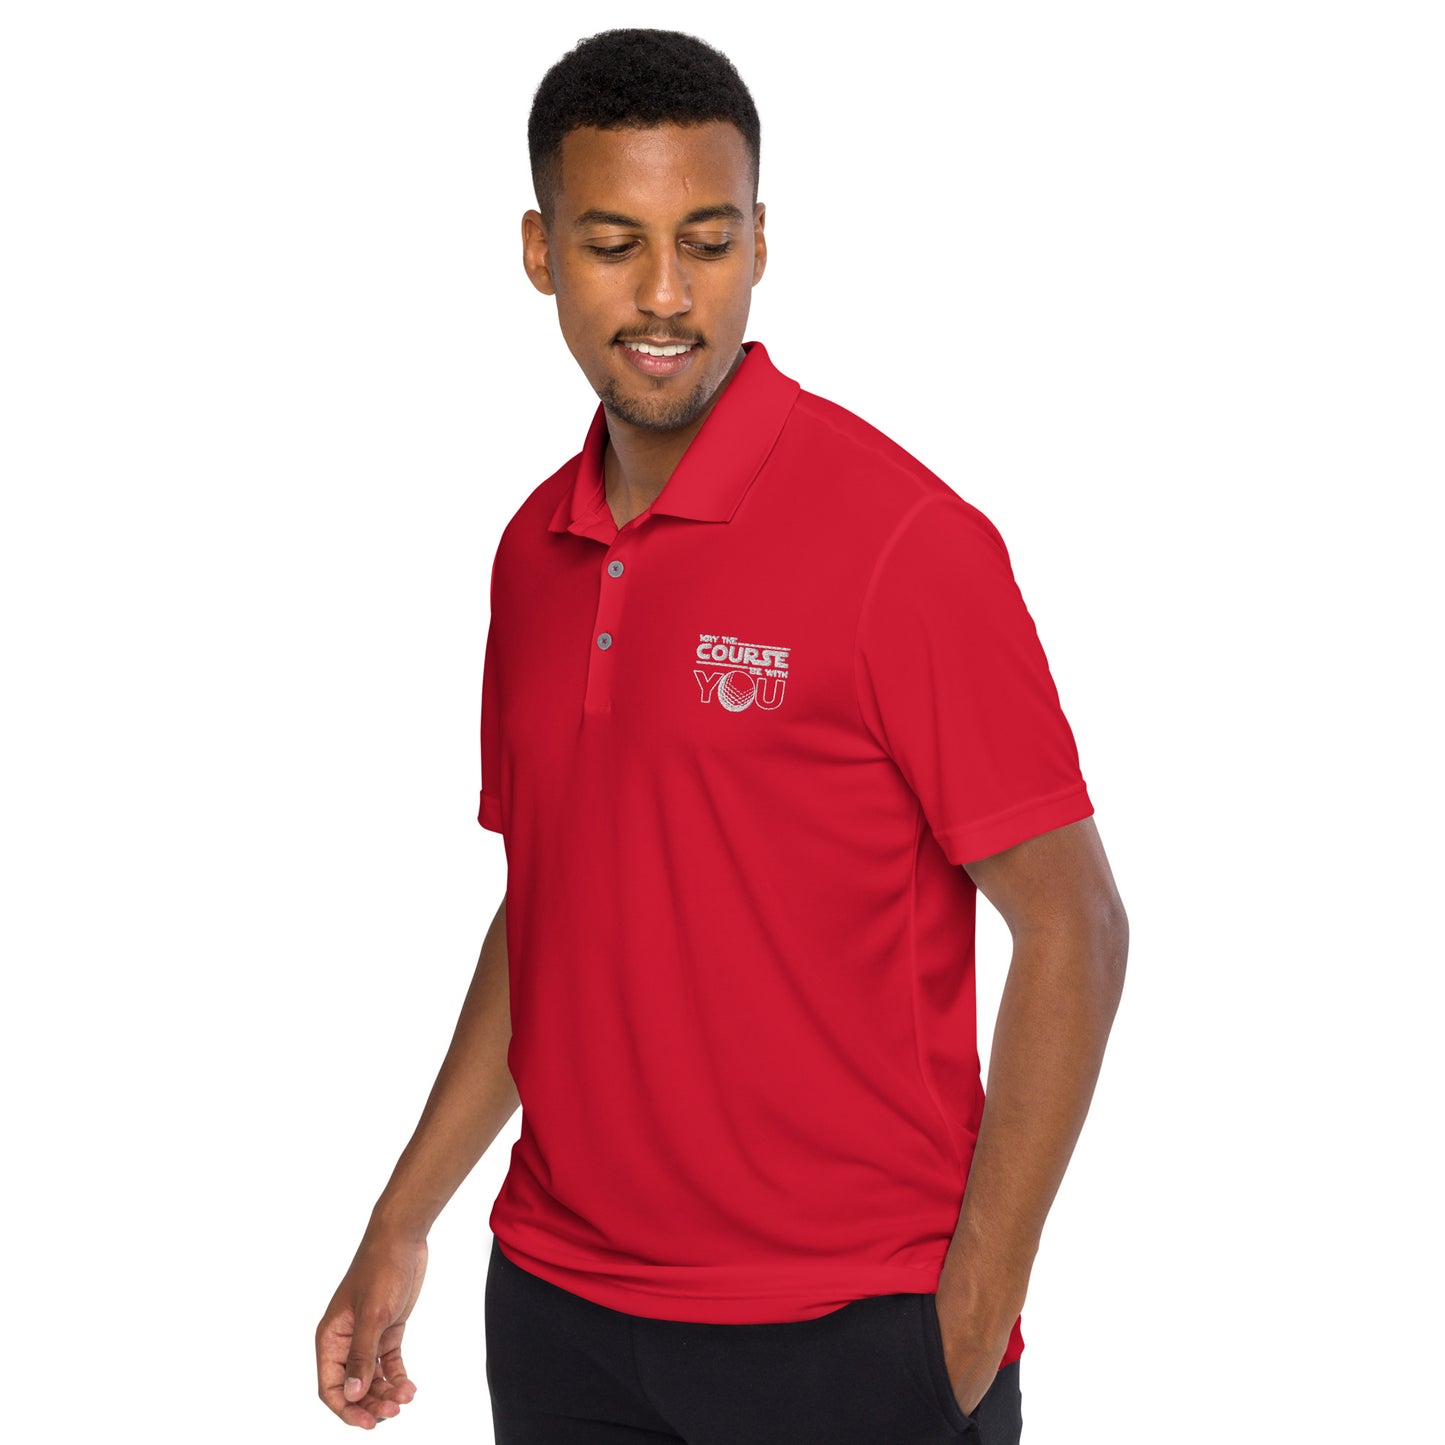 Adidas 'May The Course Be With You' Performance Polo Shirt